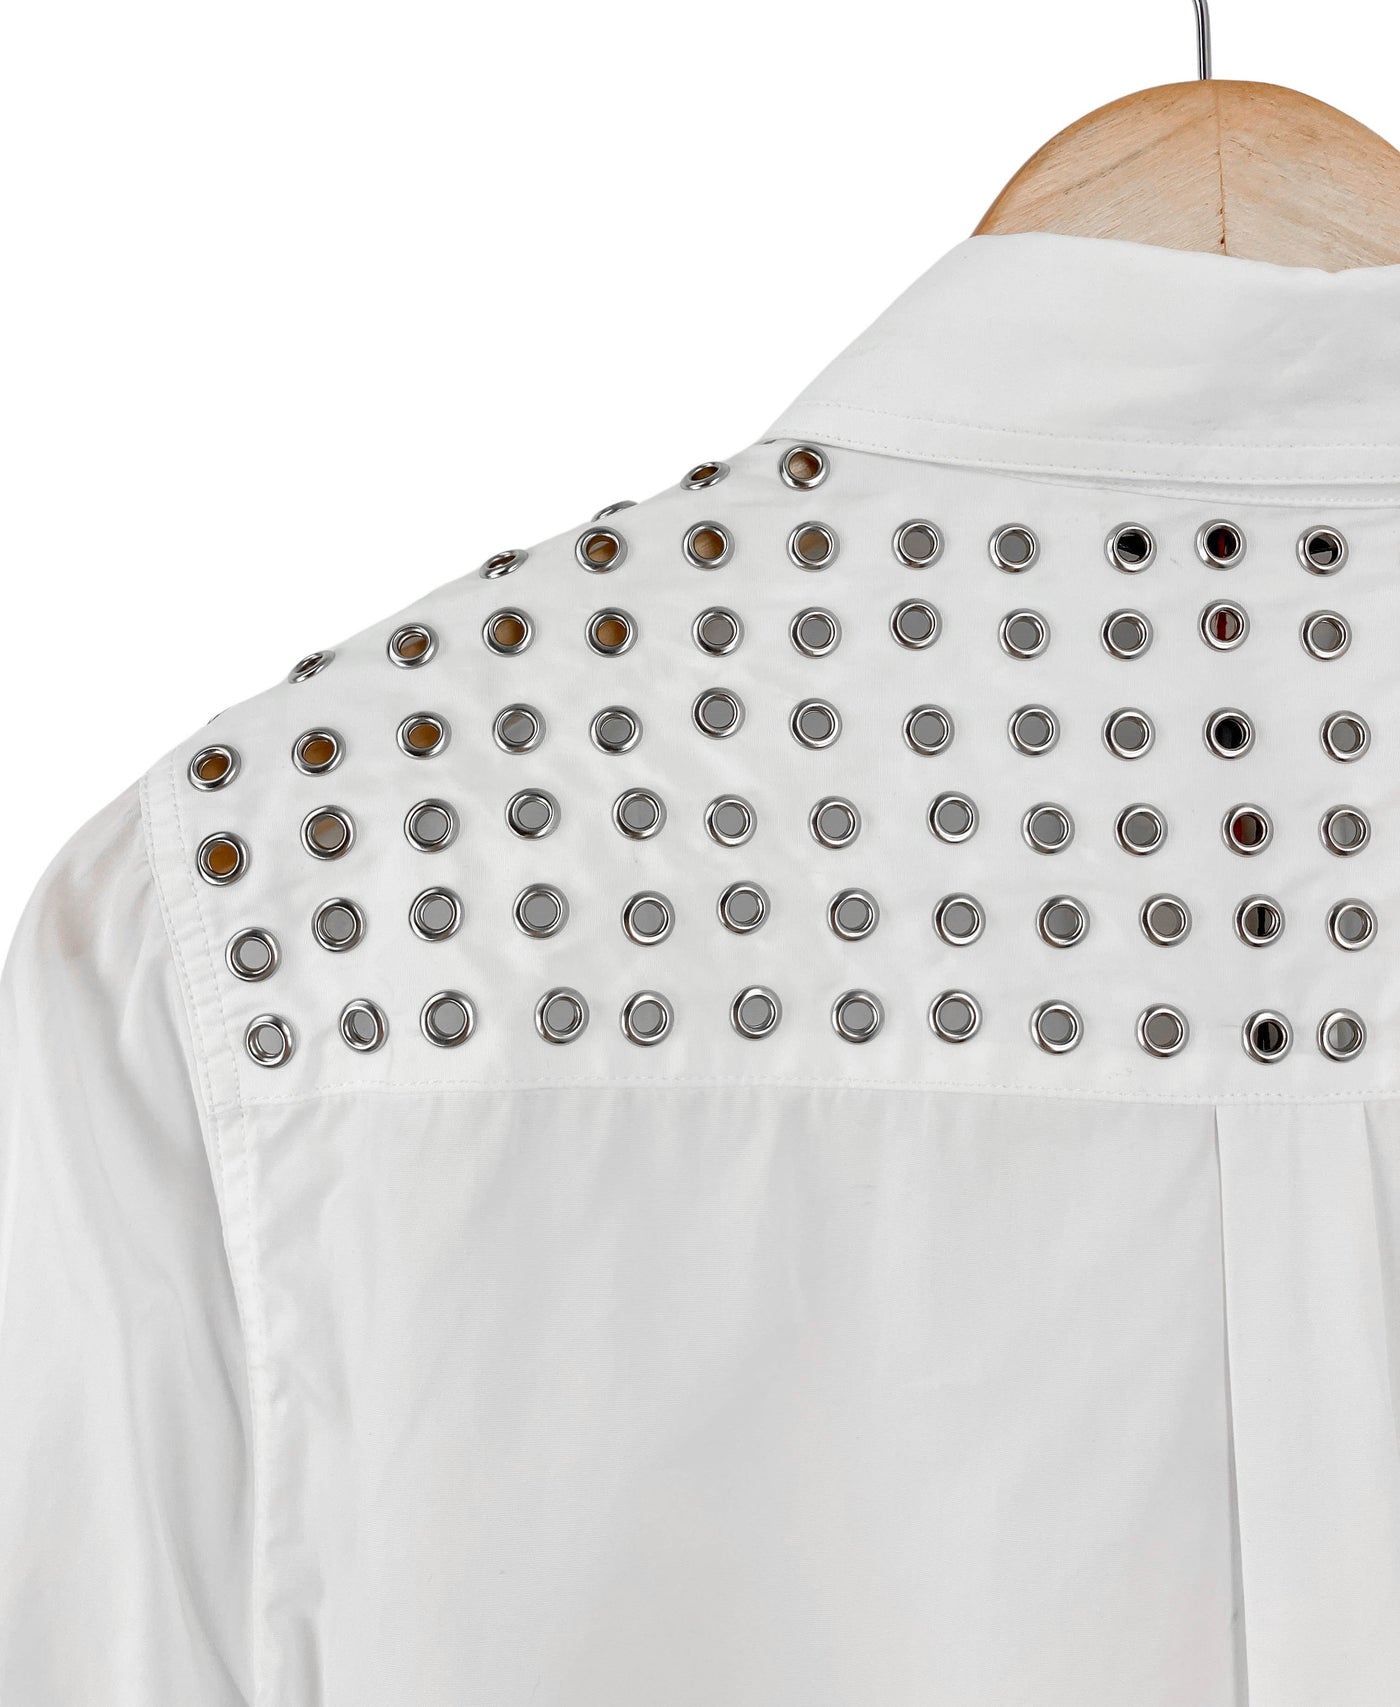 Duncan Martin Button Up Shirt in White - Discounts on Duncan at UAL